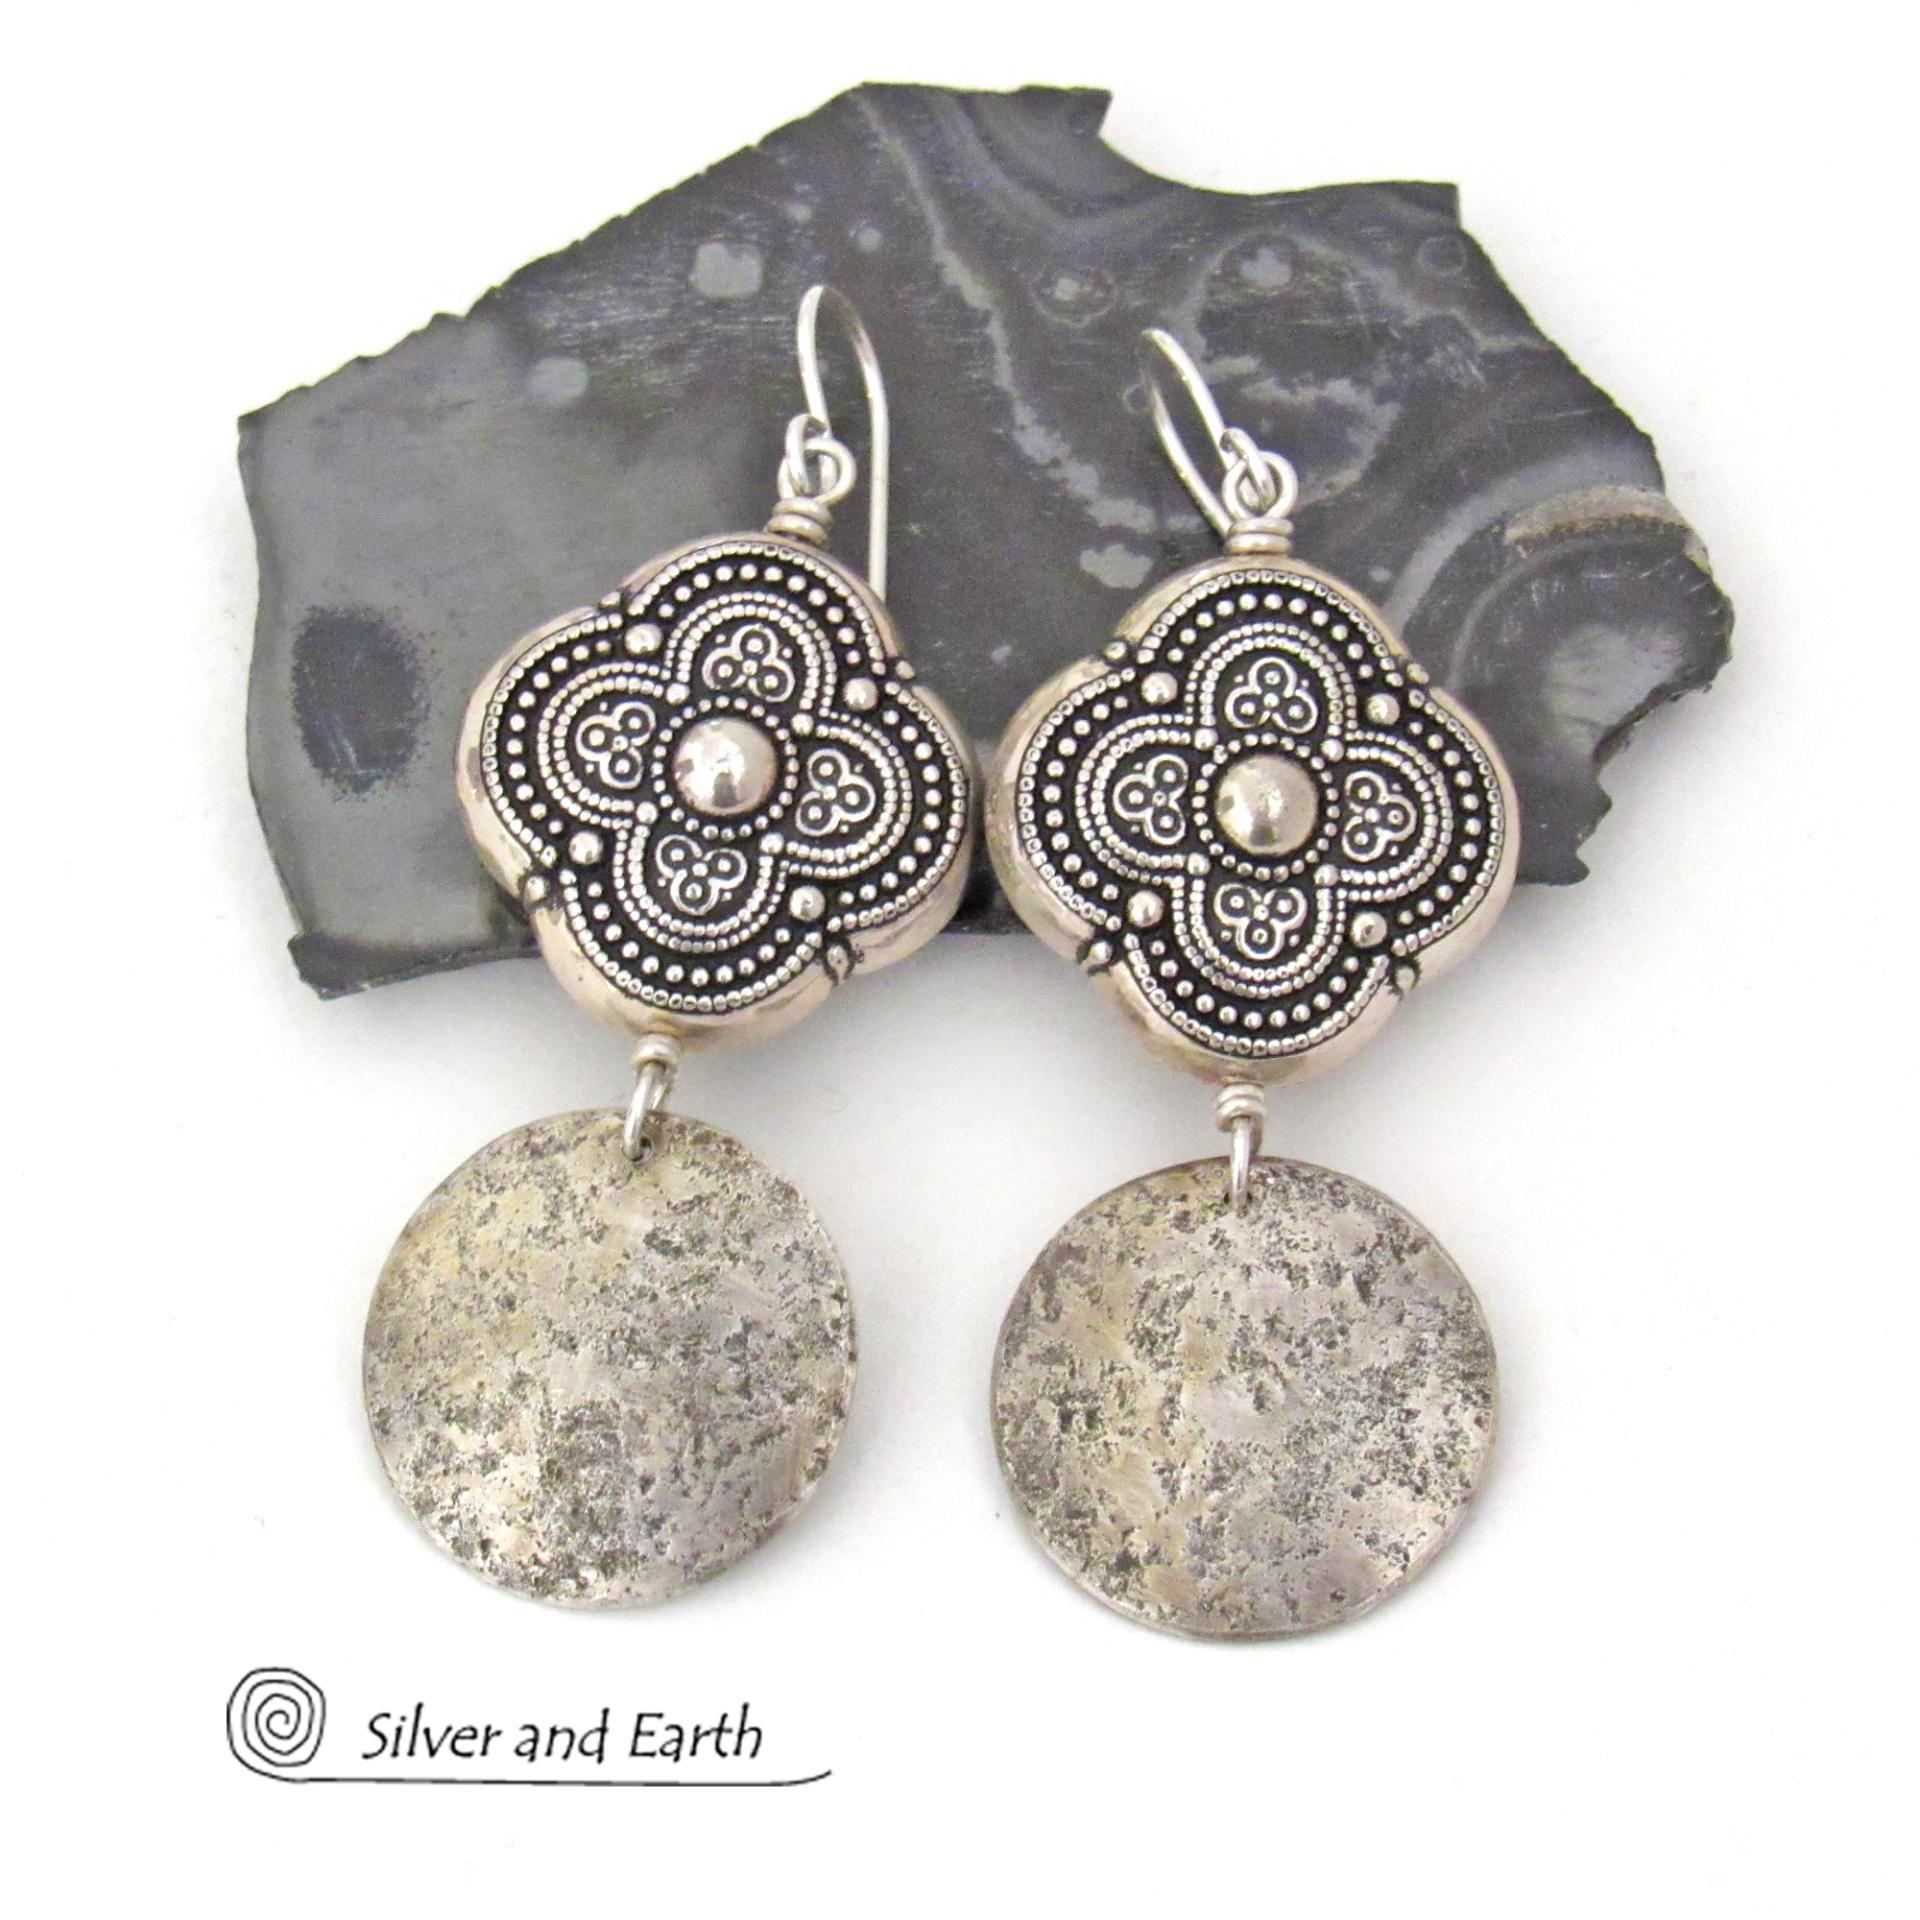 Sterling Silver Dangle Earrings with Moroccan Style Beads - Ornate Exotic Silver Jewelry